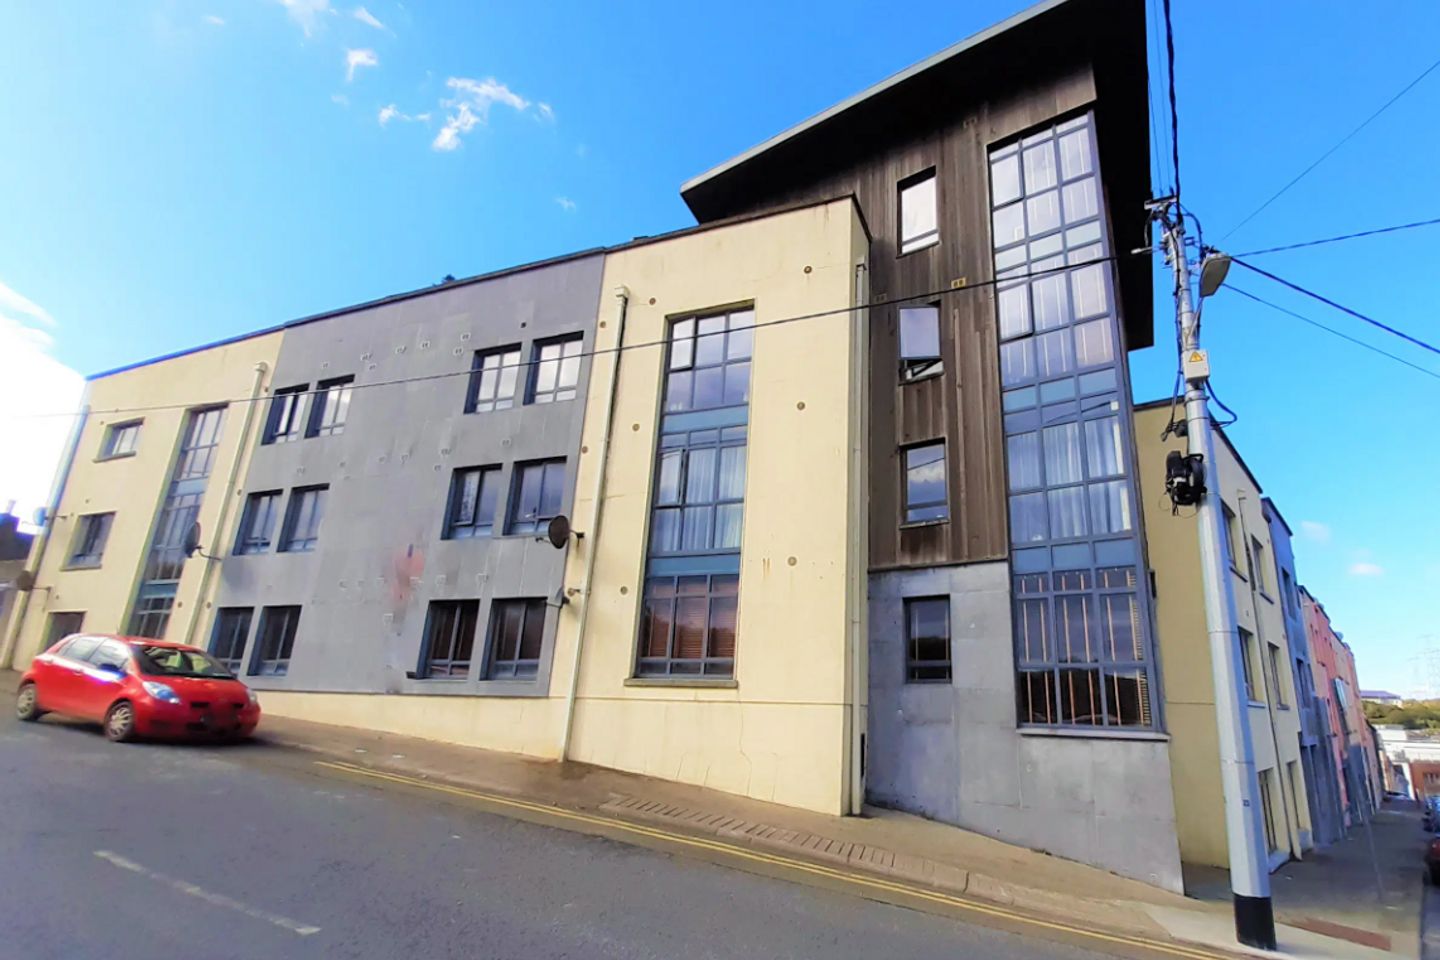 Apartment 2, Patricks Square, Waterford City, Co. Waterford, X91XE62